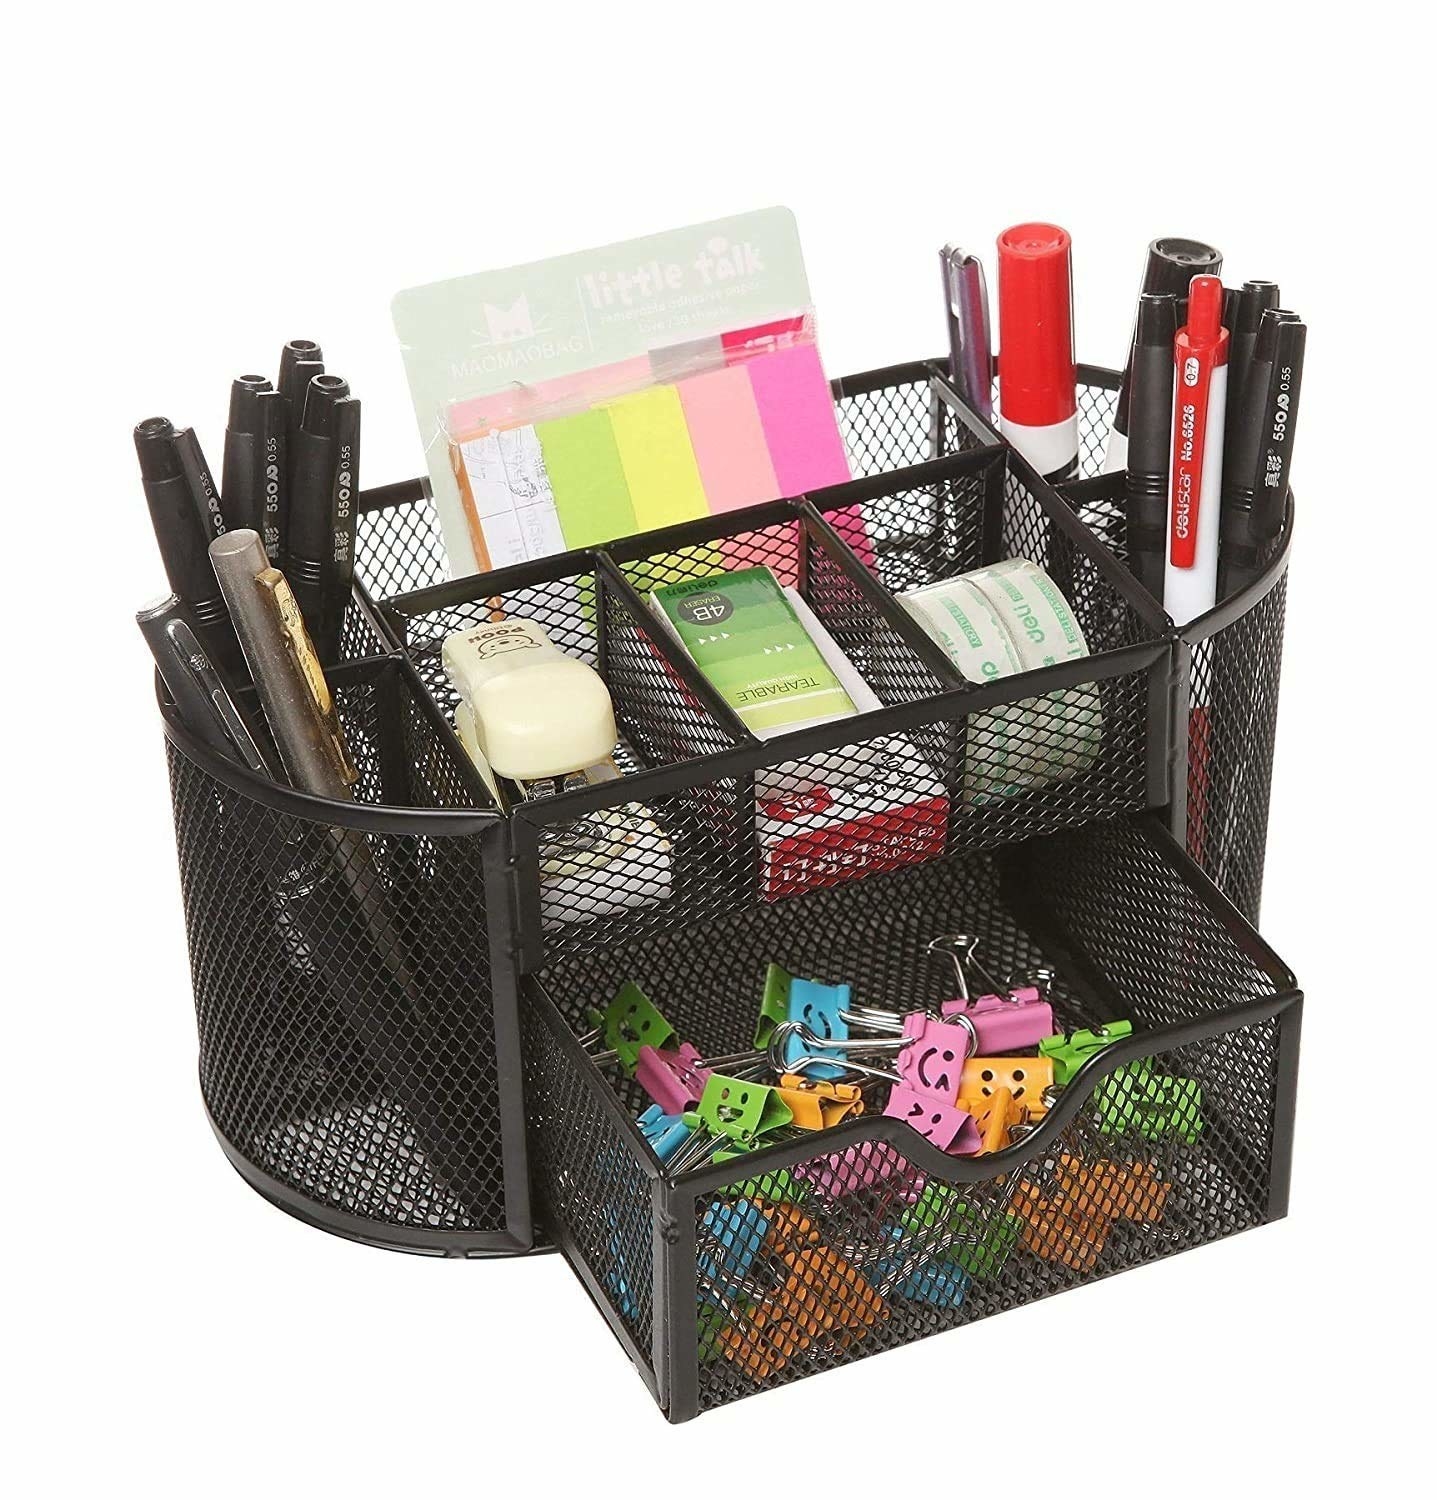 A black metal mesh organiser housing a stapler, tape, pens, paper clips, and sticky notes